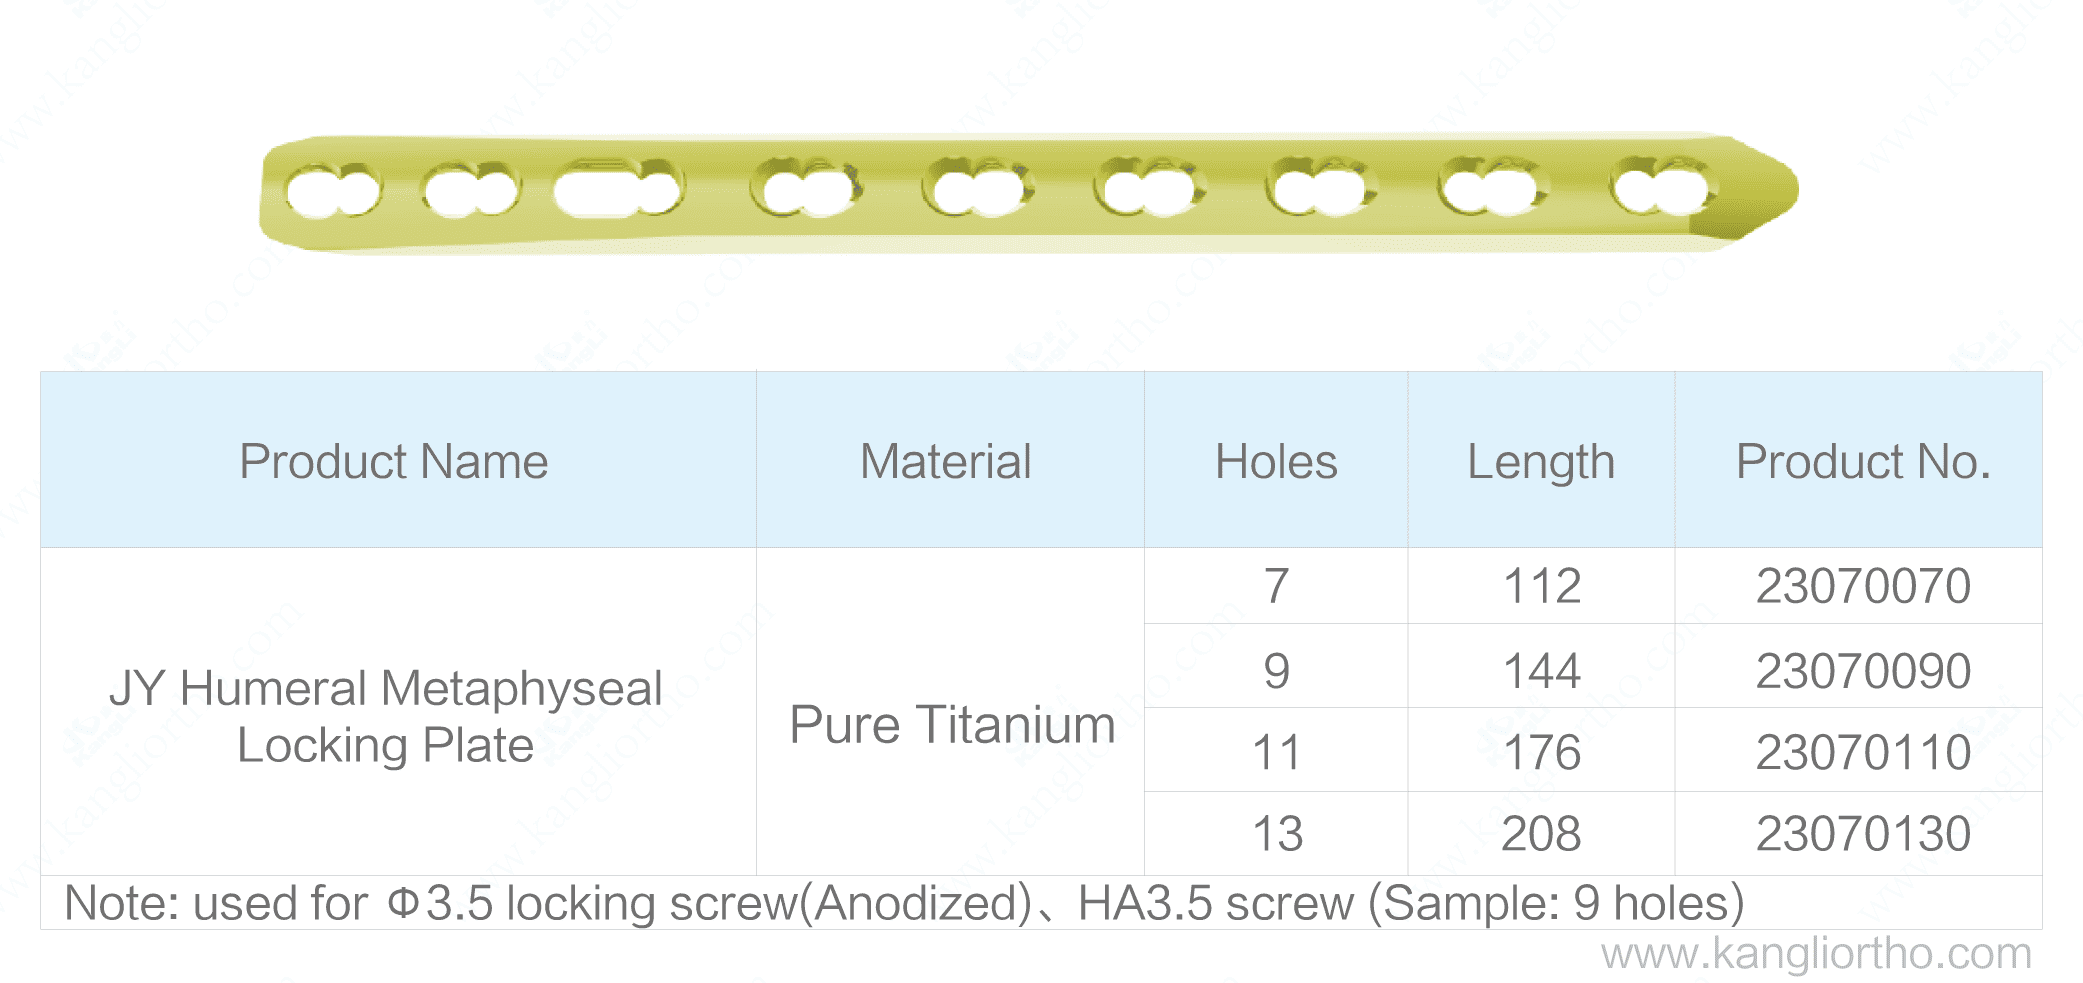 jy-humeral-metaphyseal-locking-plate-specifications